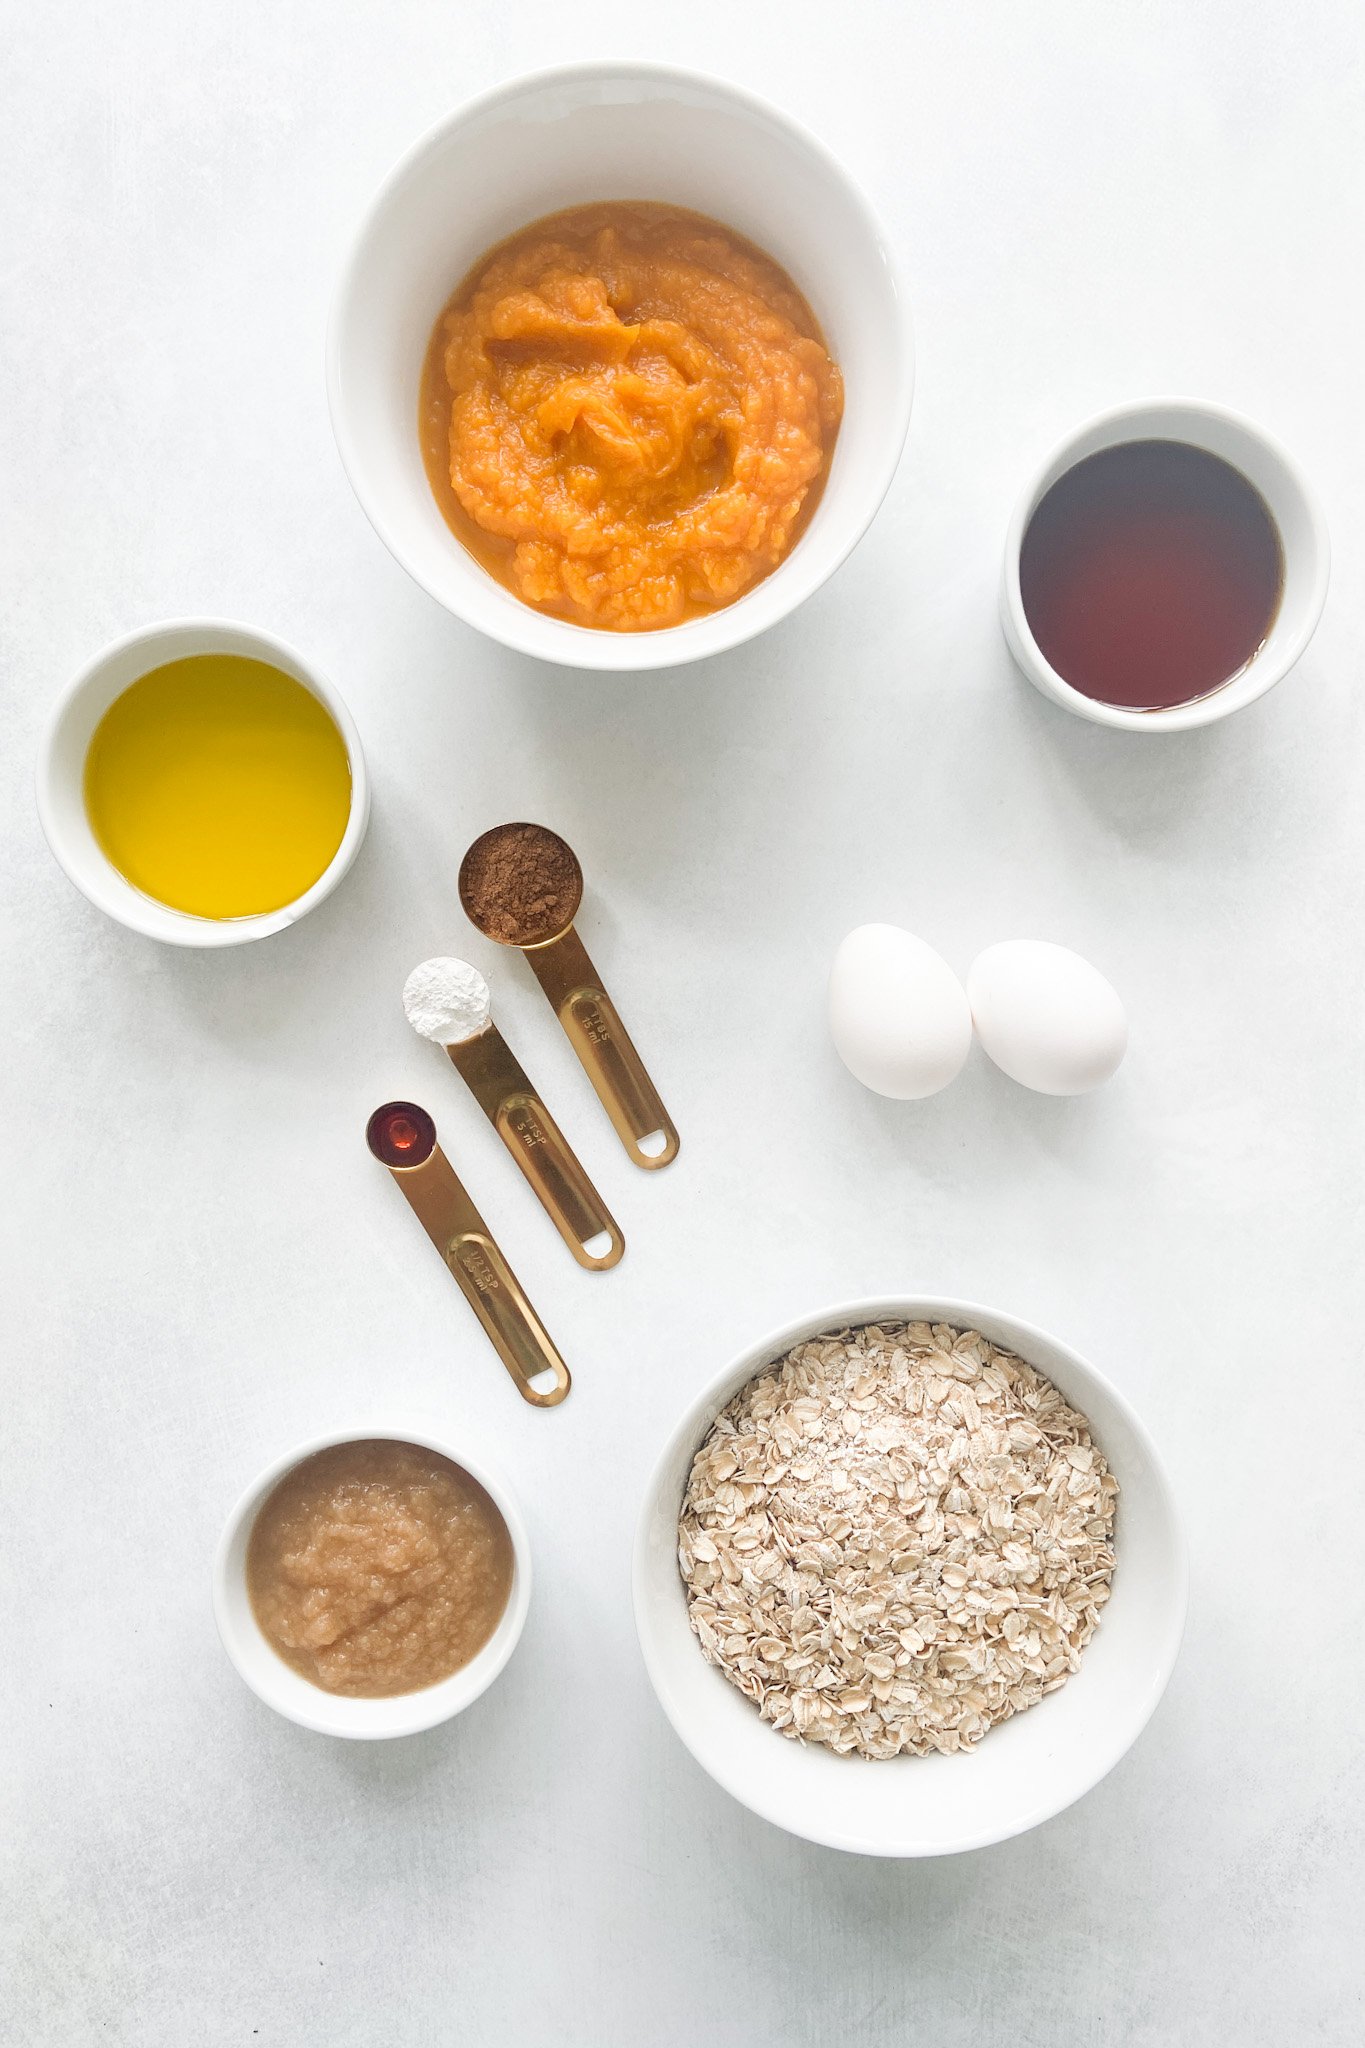 Ingredients to make pumpkin muffins. See recipe card for detailed ingredient quantities.